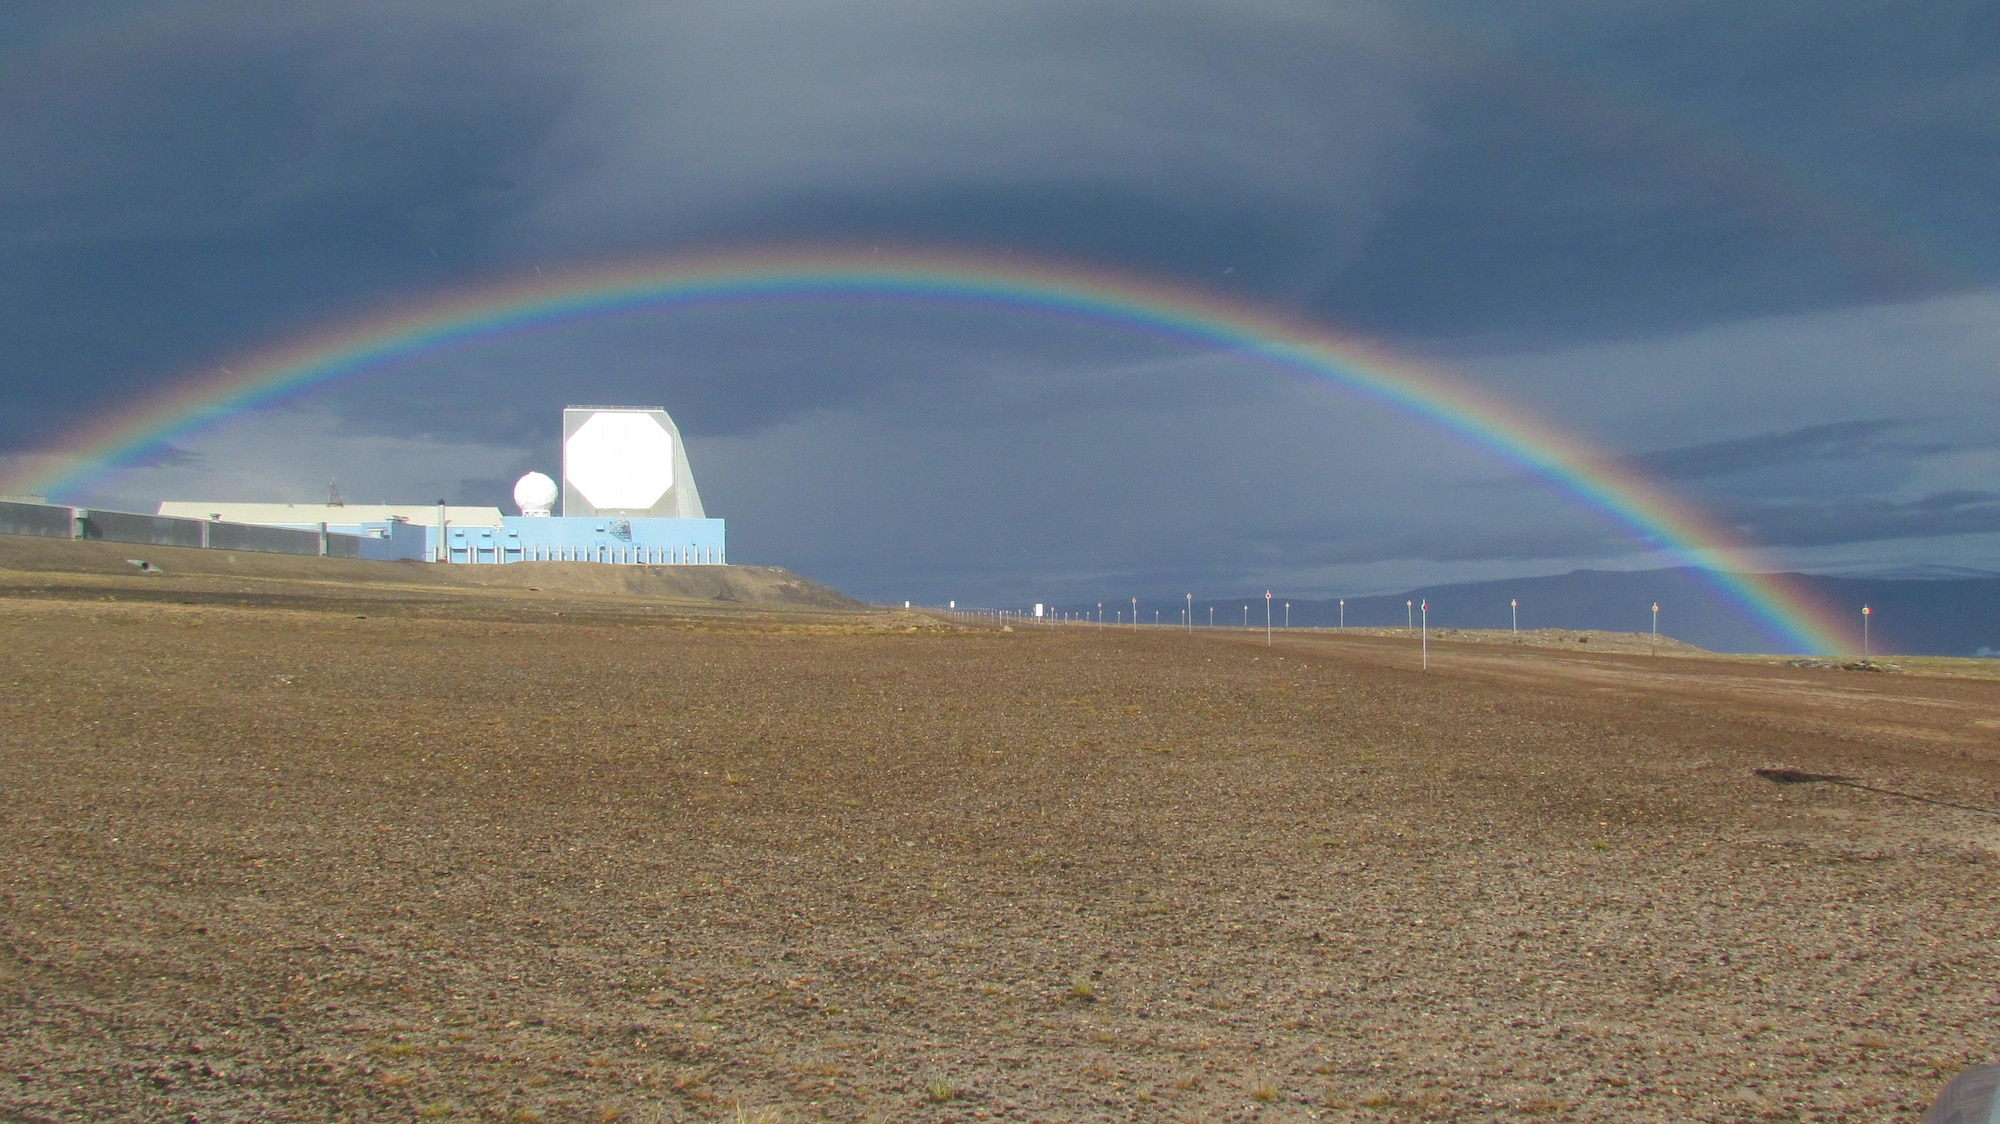 A rainbow arches above the phased-array radar system at Ballistic Missile Early Warning System – I, at Thule Air Base, Greenland. The site is operated by the 12th Space Warning Squadron, a geographically separated unit of the 21st Space Wing at Peterson Air Force Base, Colo. The Air Force Life Cycle Management Center, Hanscom Air Force Base, Mass., awarded a $40 million contract Dec., 2016 to Raytheon Integrated Defense Systems to upgrade hardware and software at the site. (Courtesy Photo)